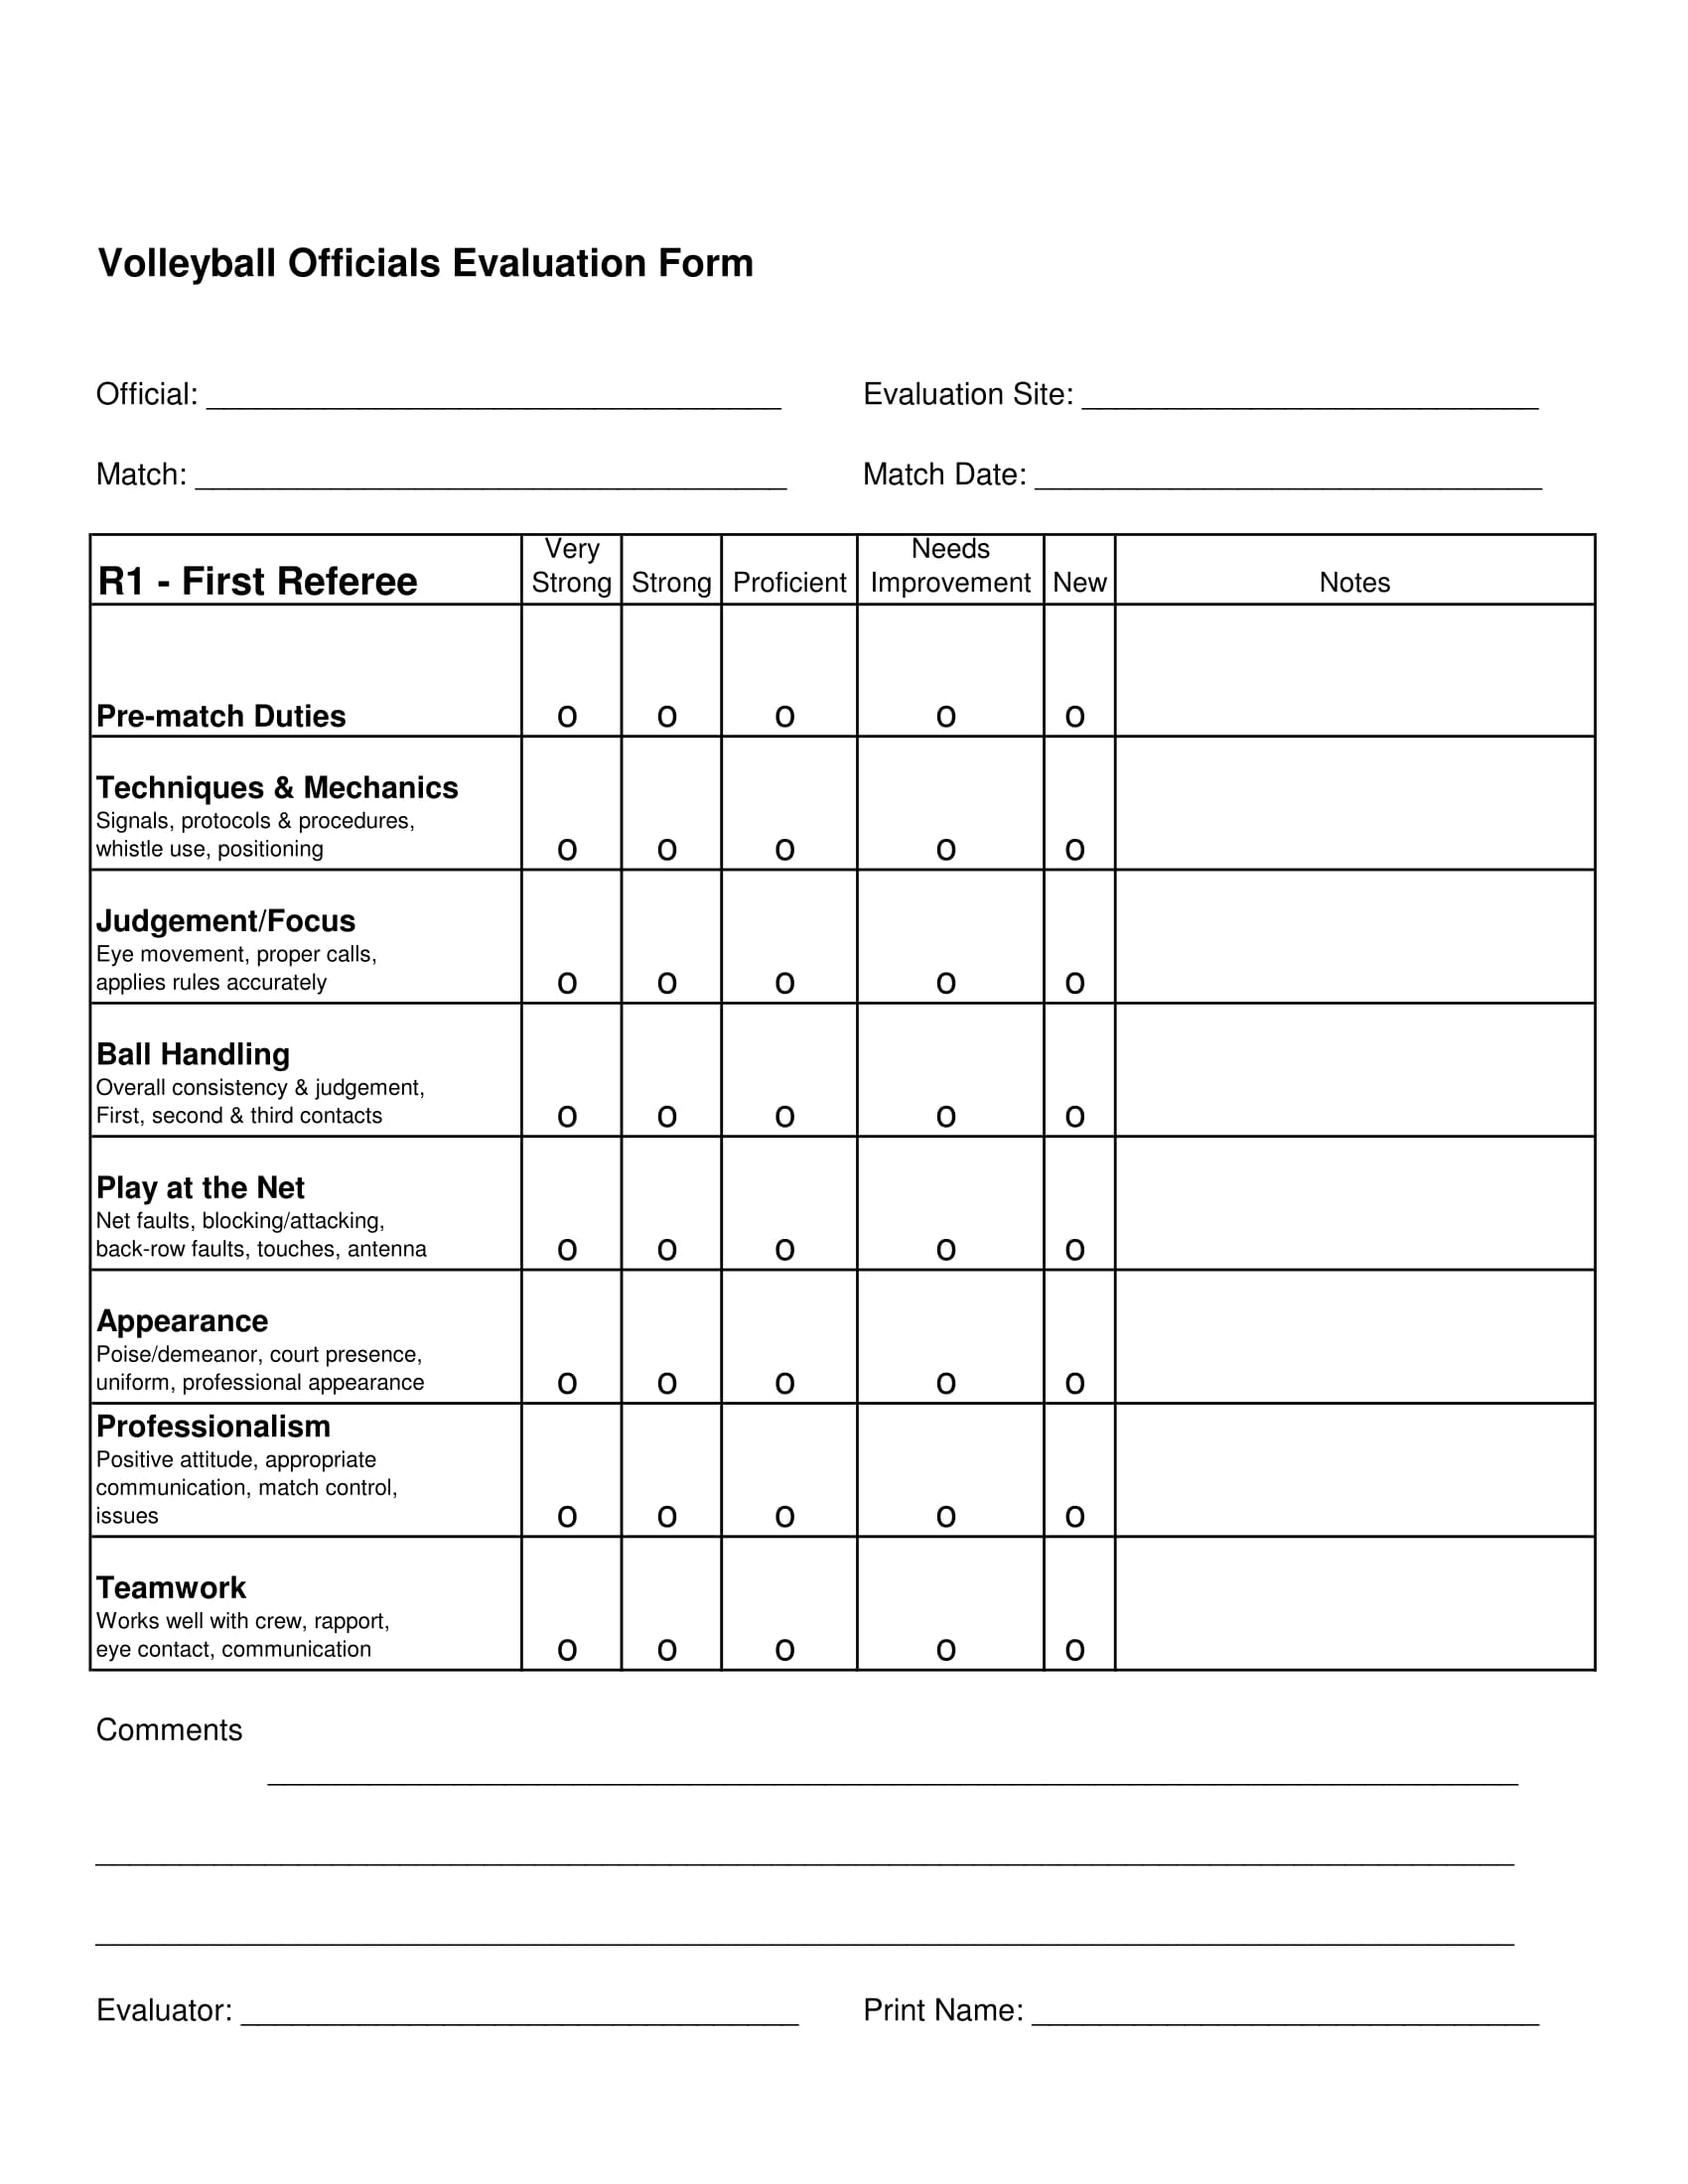 volleyball officials evaluation form 1